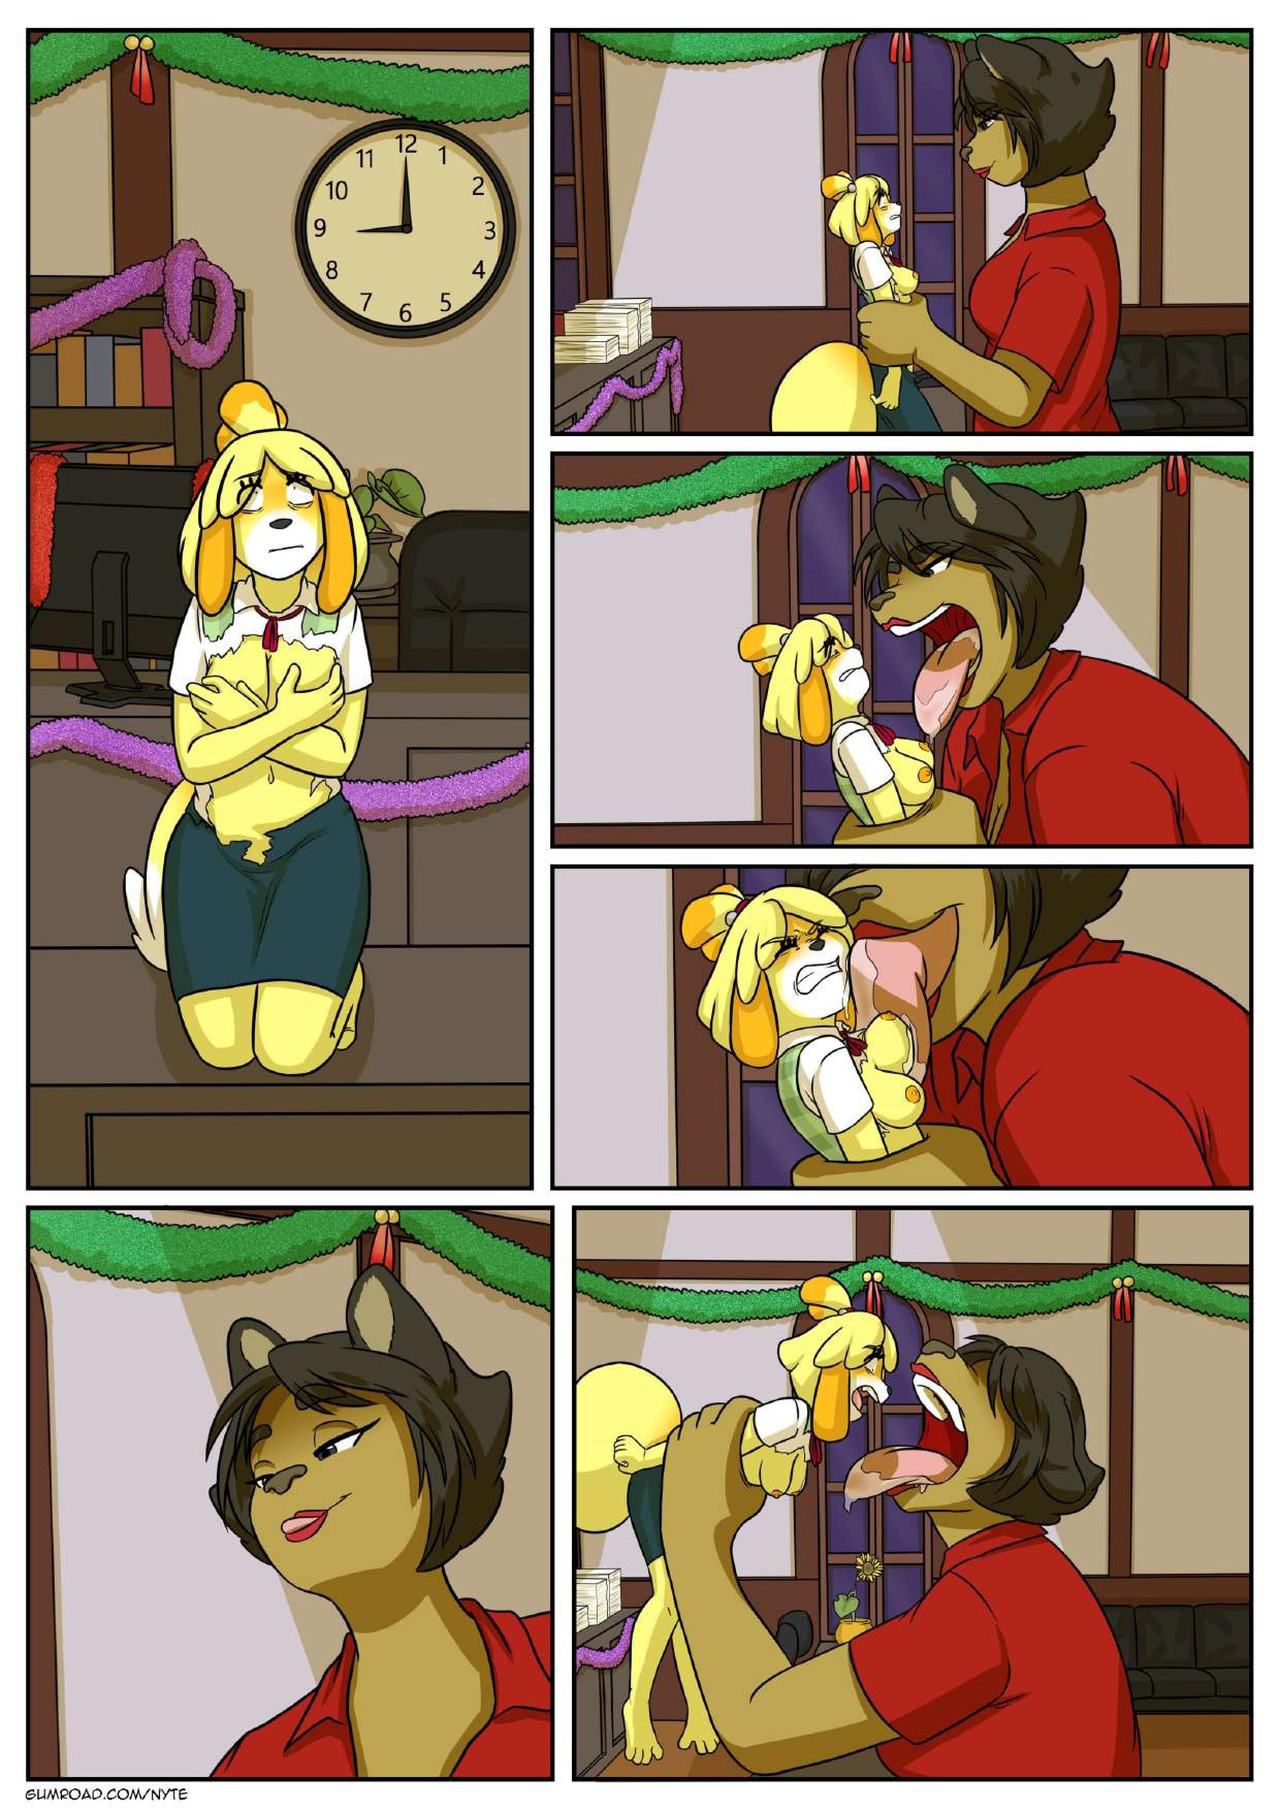 [Nyte] Crossing Isabelle 11